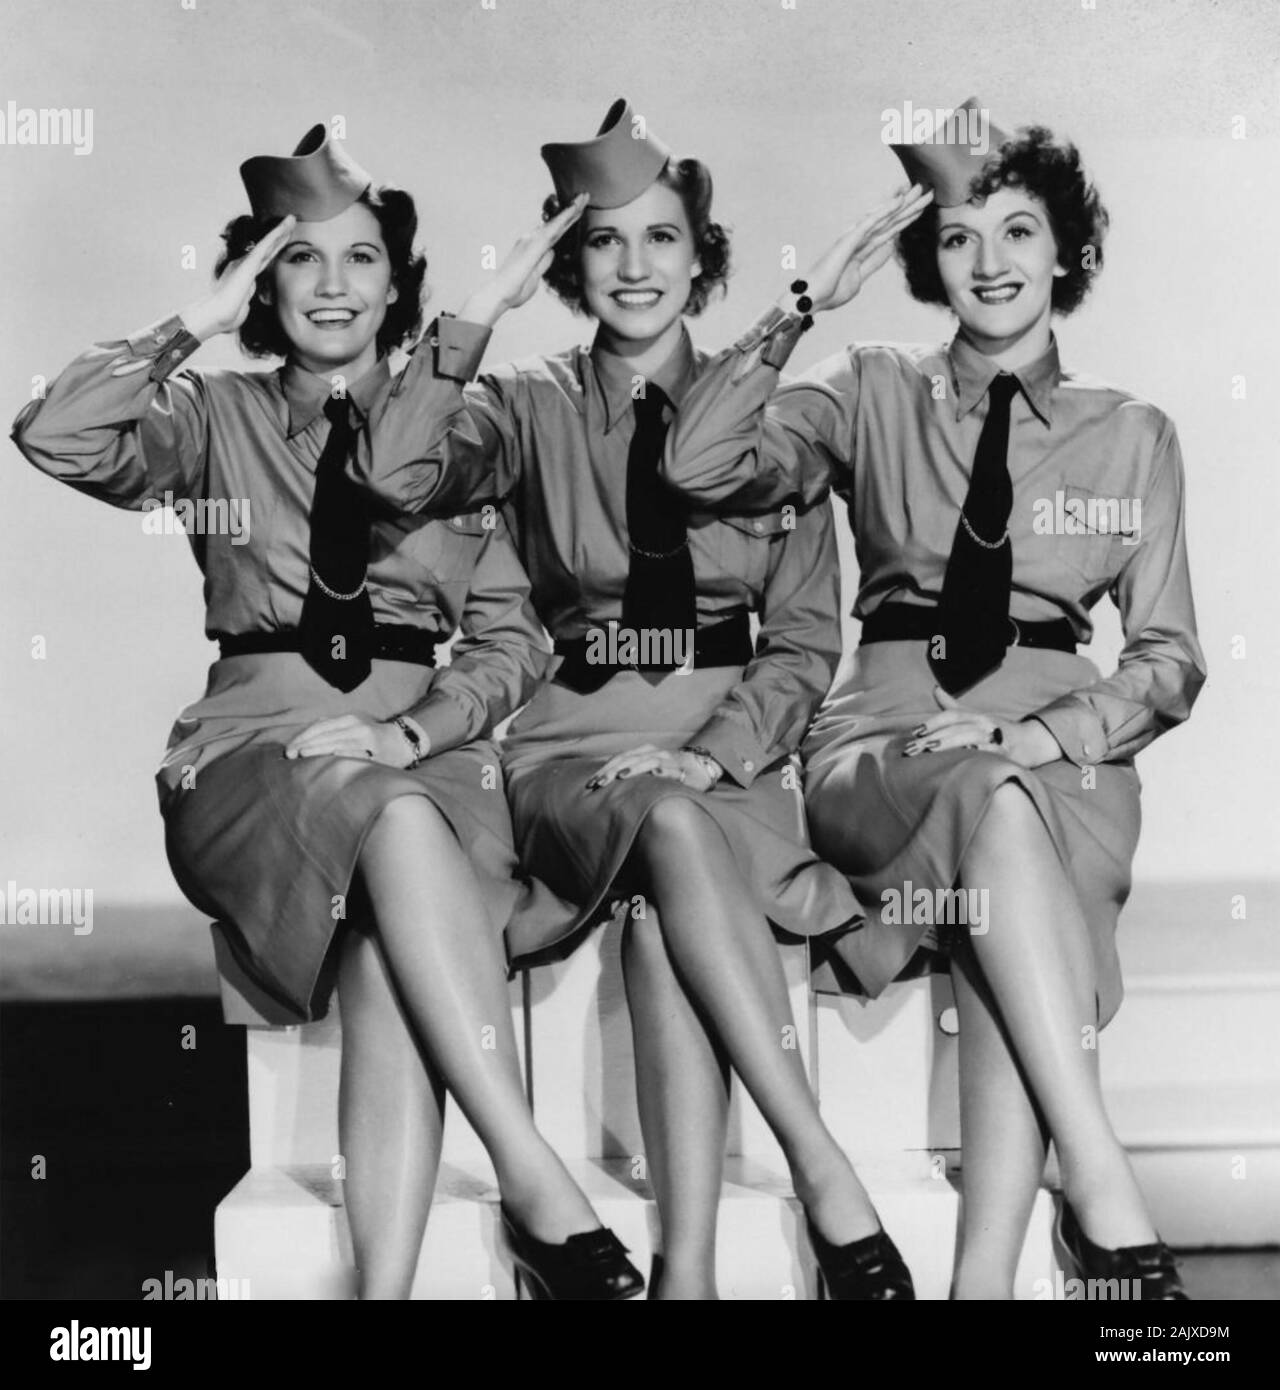 ANDREWS SISTERS Promotional photo of American vocal group about 1944. From left: Maxene,Patti, LaVerne. Stock Photo